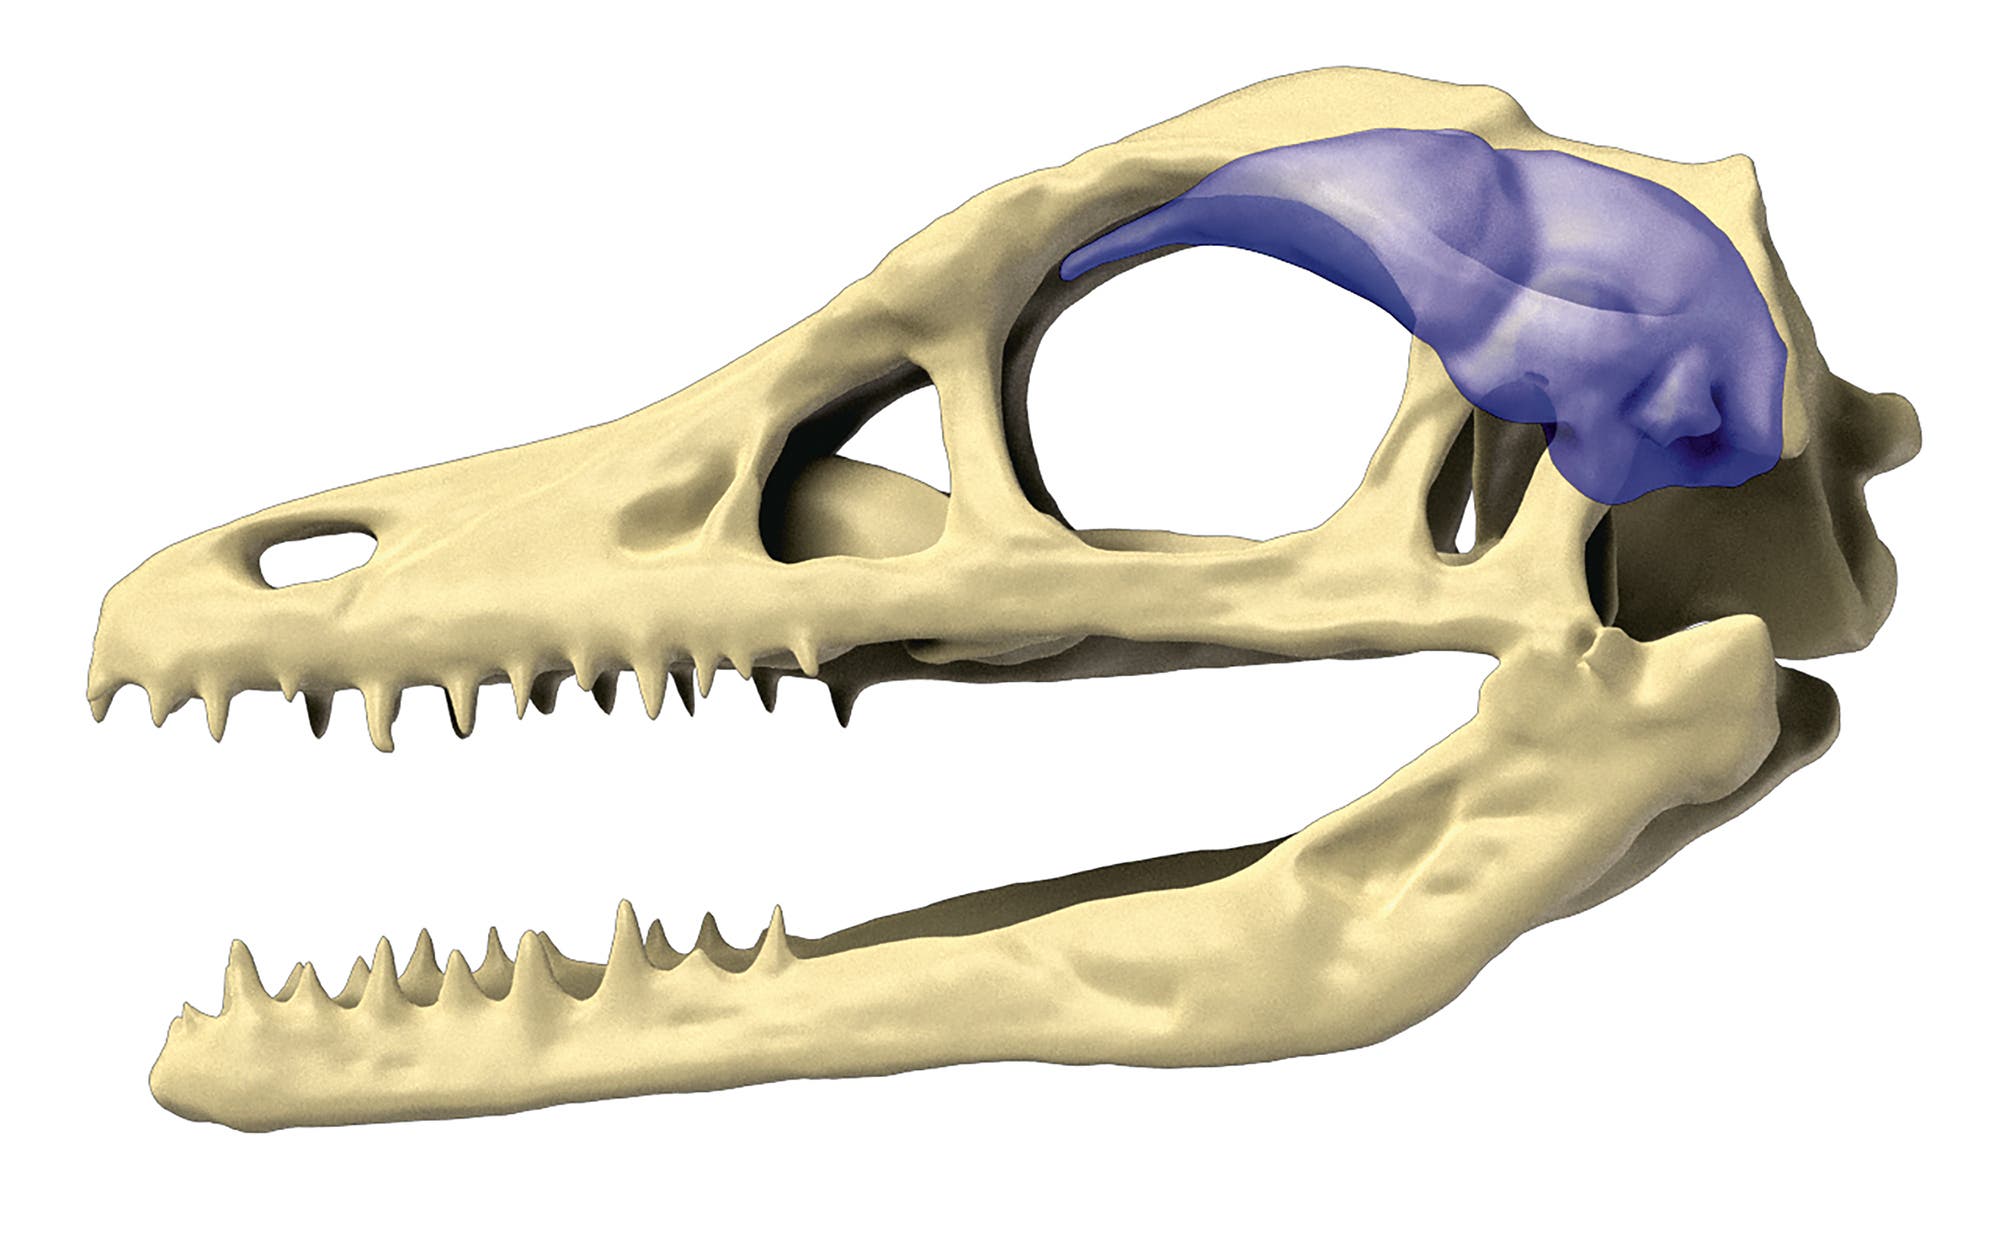 Natural and virtual casts of the skull